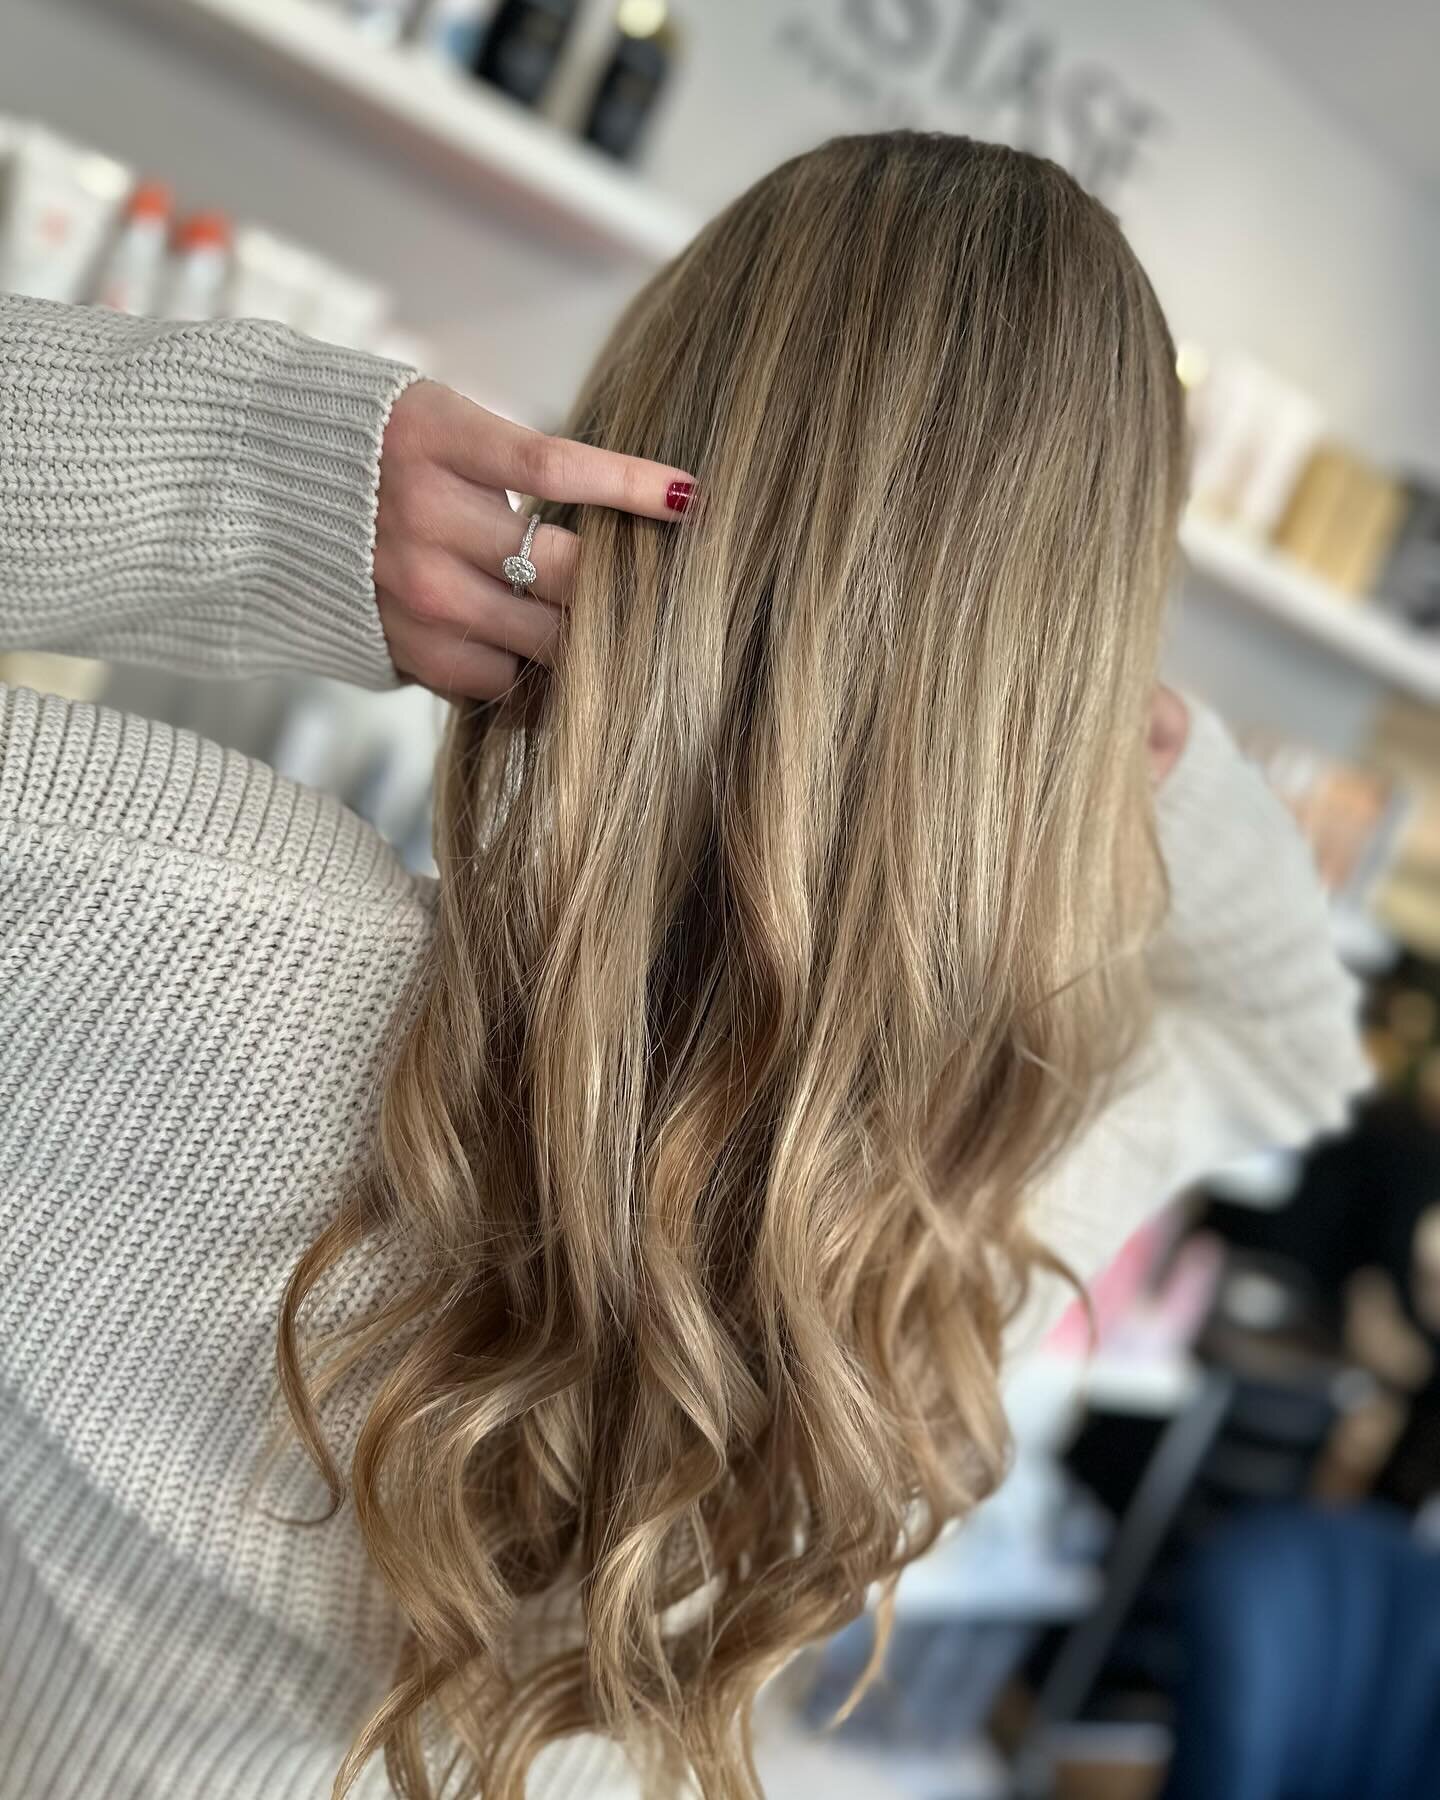 📸 Countdown to the big day: 7 days! 💍✨ Can't forget to include the ring in the picture when you're about to tie the knot! Shoutout to Vic for the stunning balayage! 💇&zwj;♀️ #weddingready